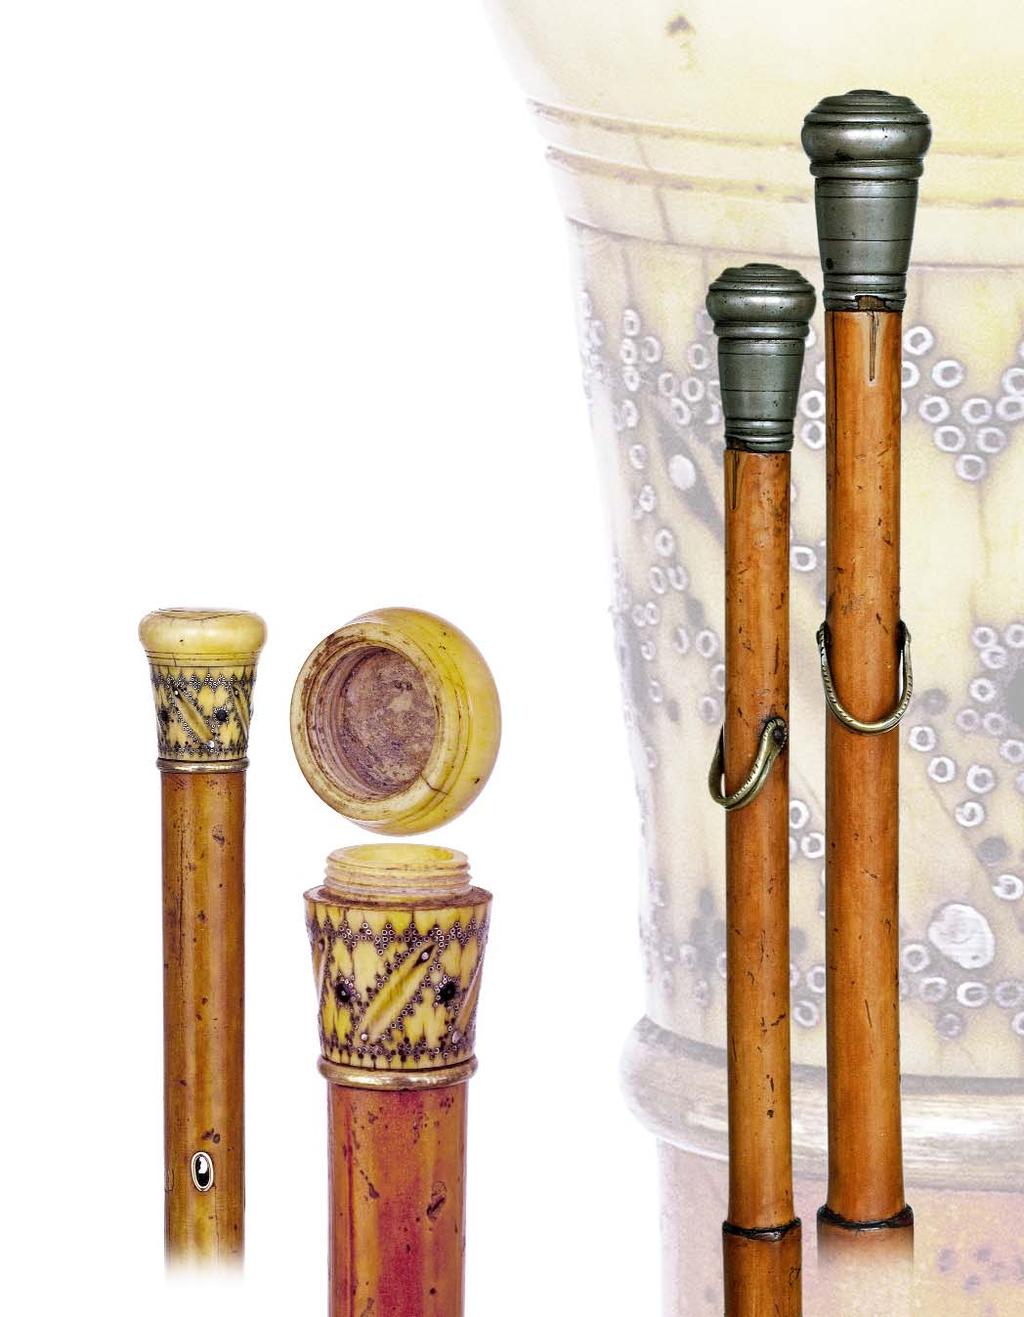 107. Continental Officer s Cane Middle of the 18th Century-Turned white metal knob on a stepped, full bark malacca shaft with a brass lanyard hanger and a 3 ¼ tall and a period fringed iron ferrule.